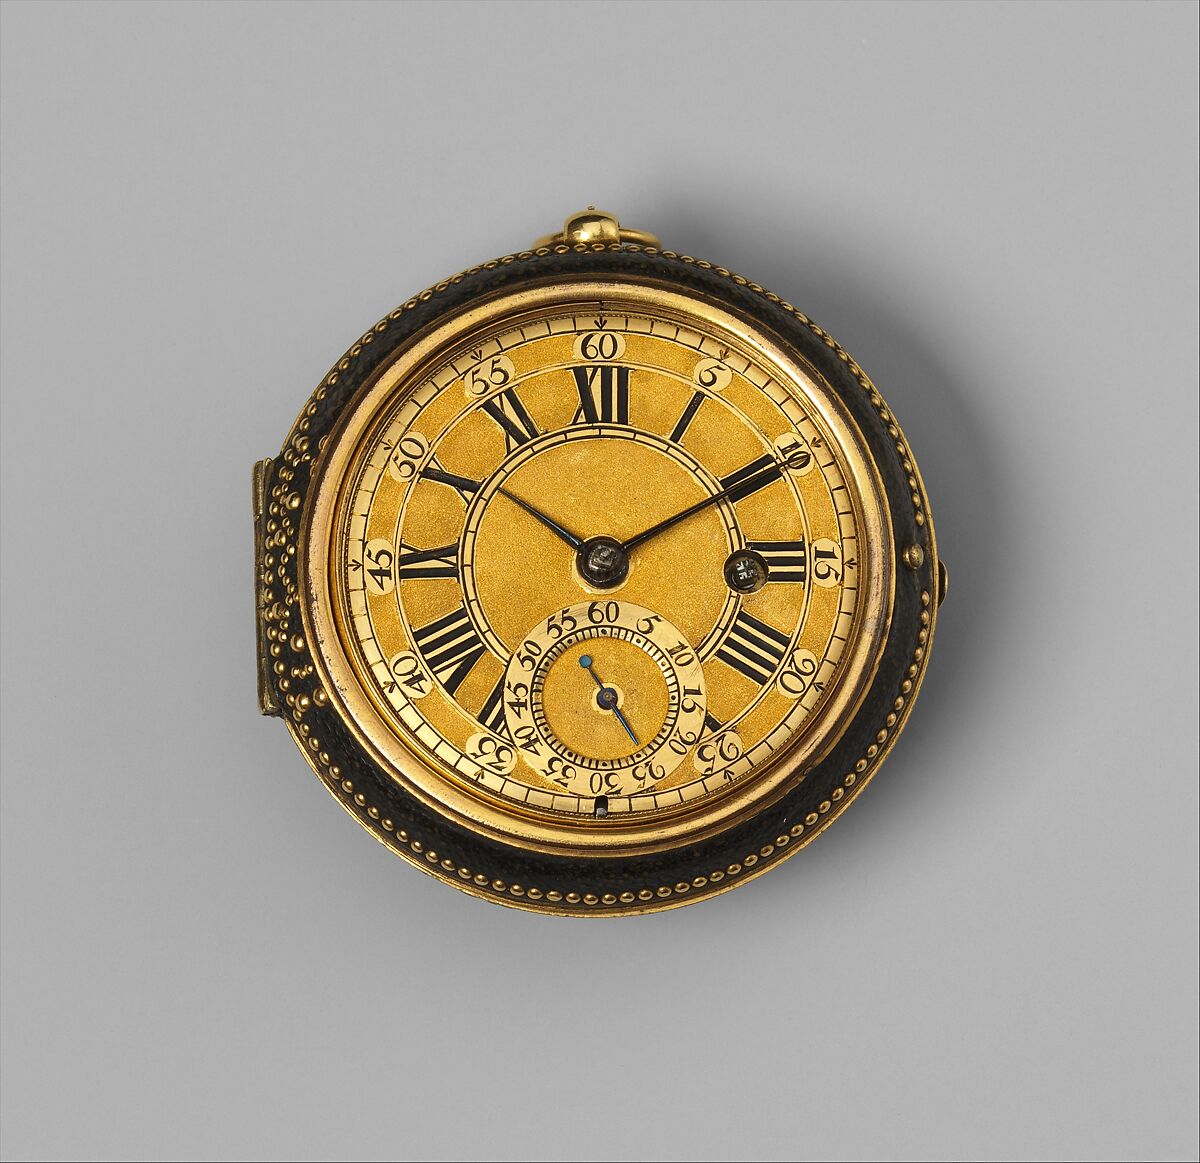 Pair-case watch, Watchmaker: Thomas Tompion (British, 1639–1713), Outer case: leather with gold studs; inner case and dial: gold with blued-steel hands; movement: gilded brass, partly blued steel, silver, British, London 